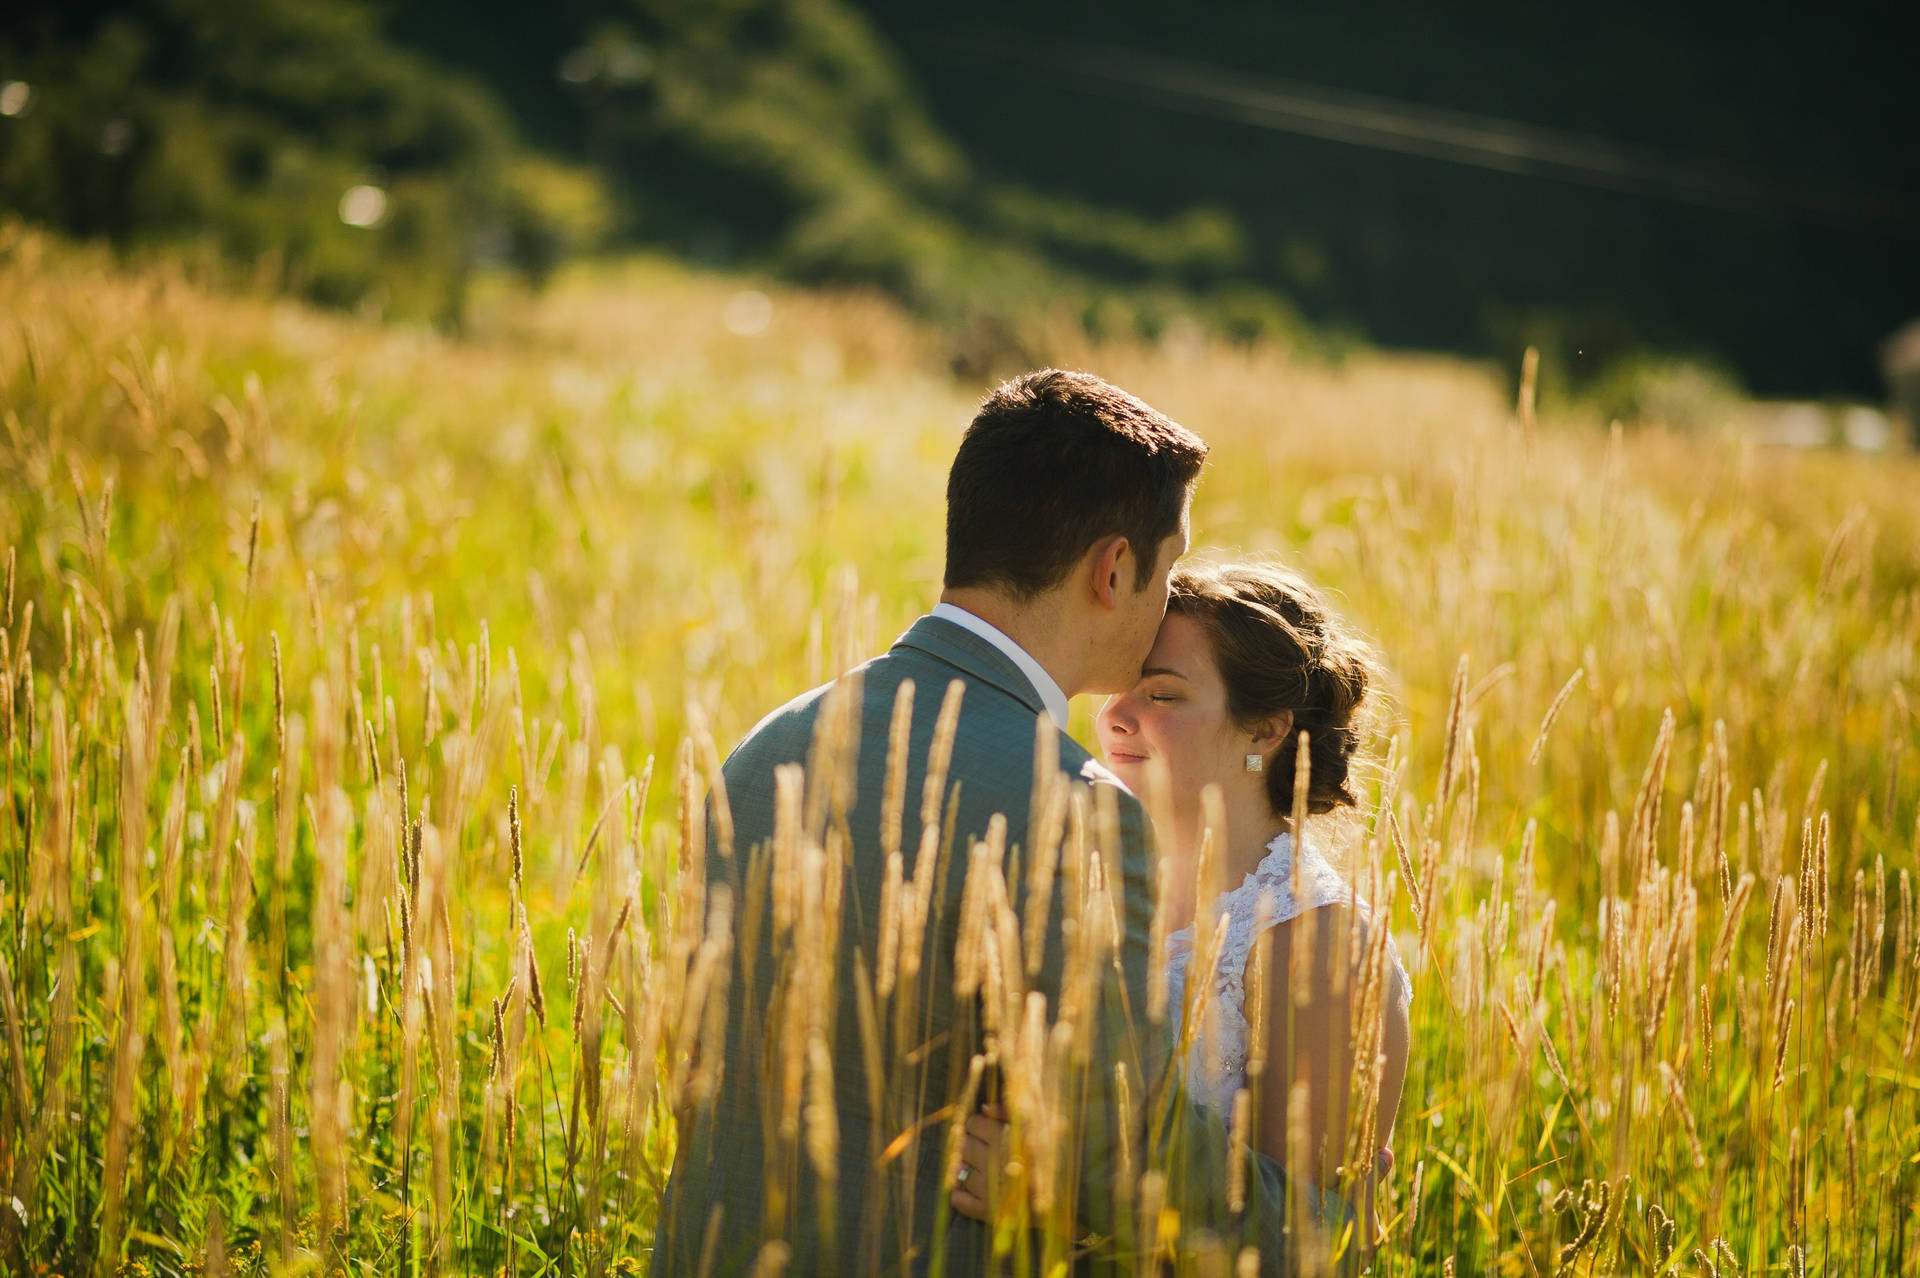 Romantic Couple Kiss In Golden Field Background